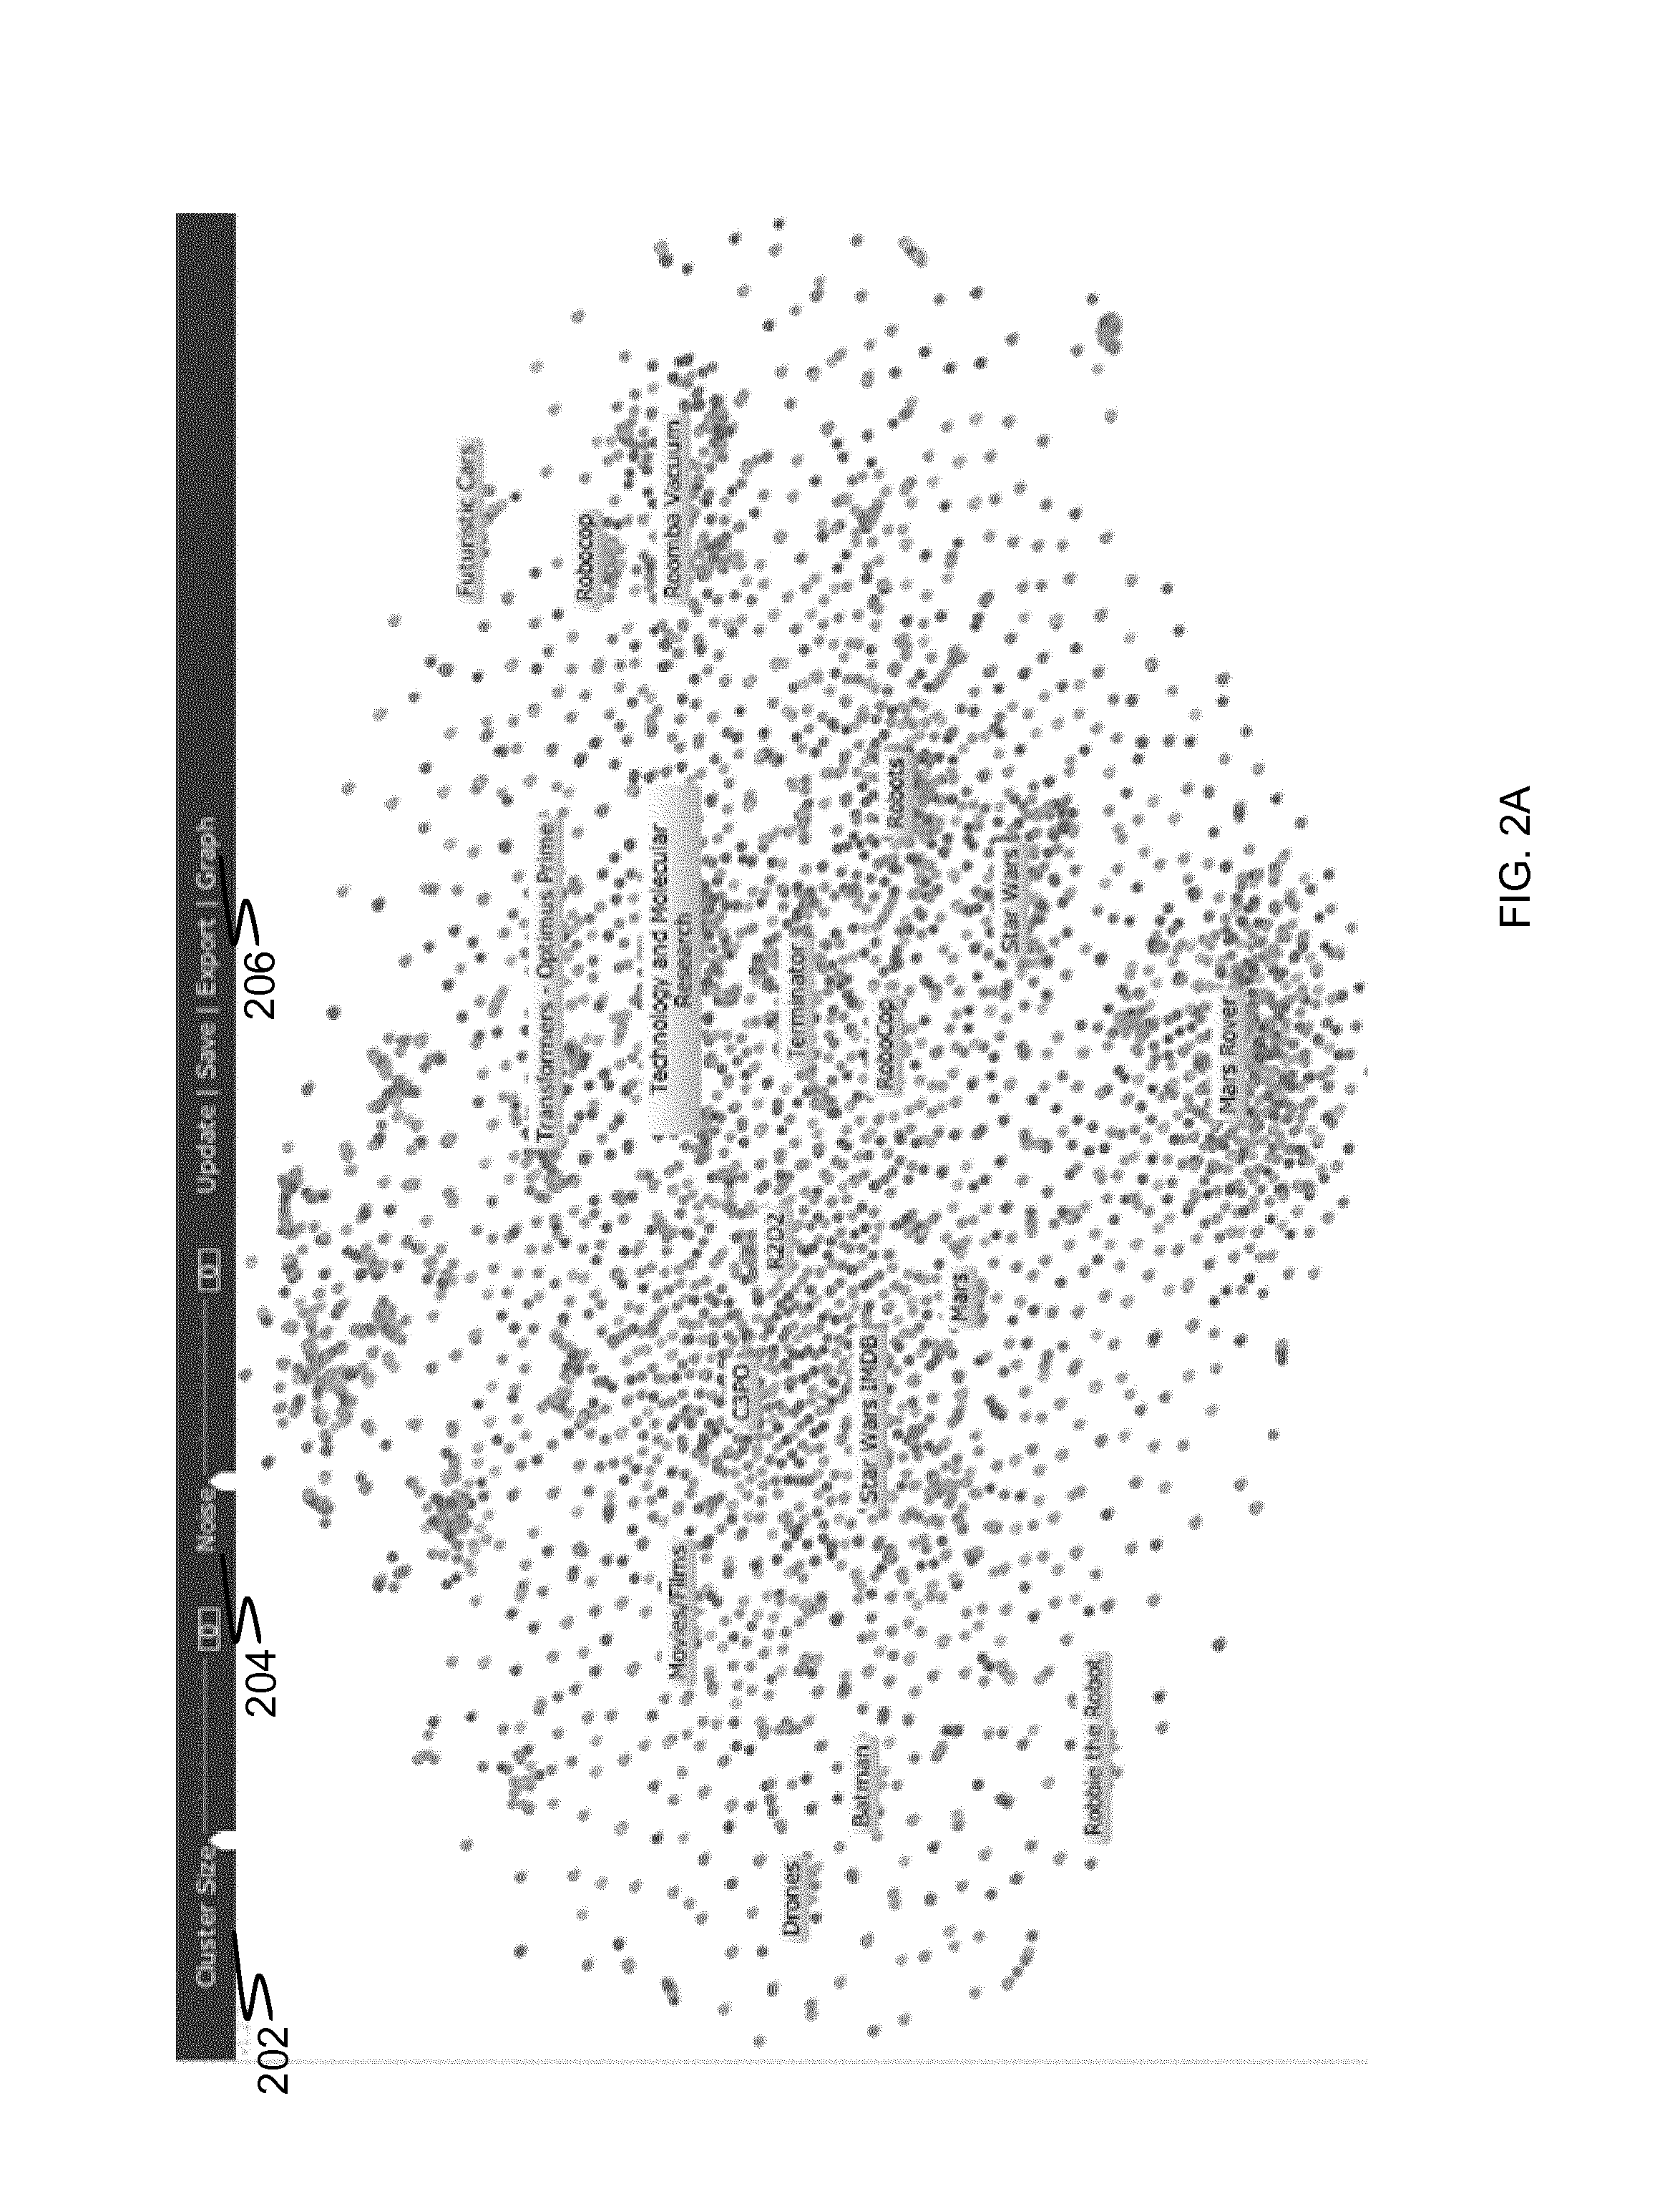 Clustering of text units using dimensionality reduction of multi-dimensional arrays